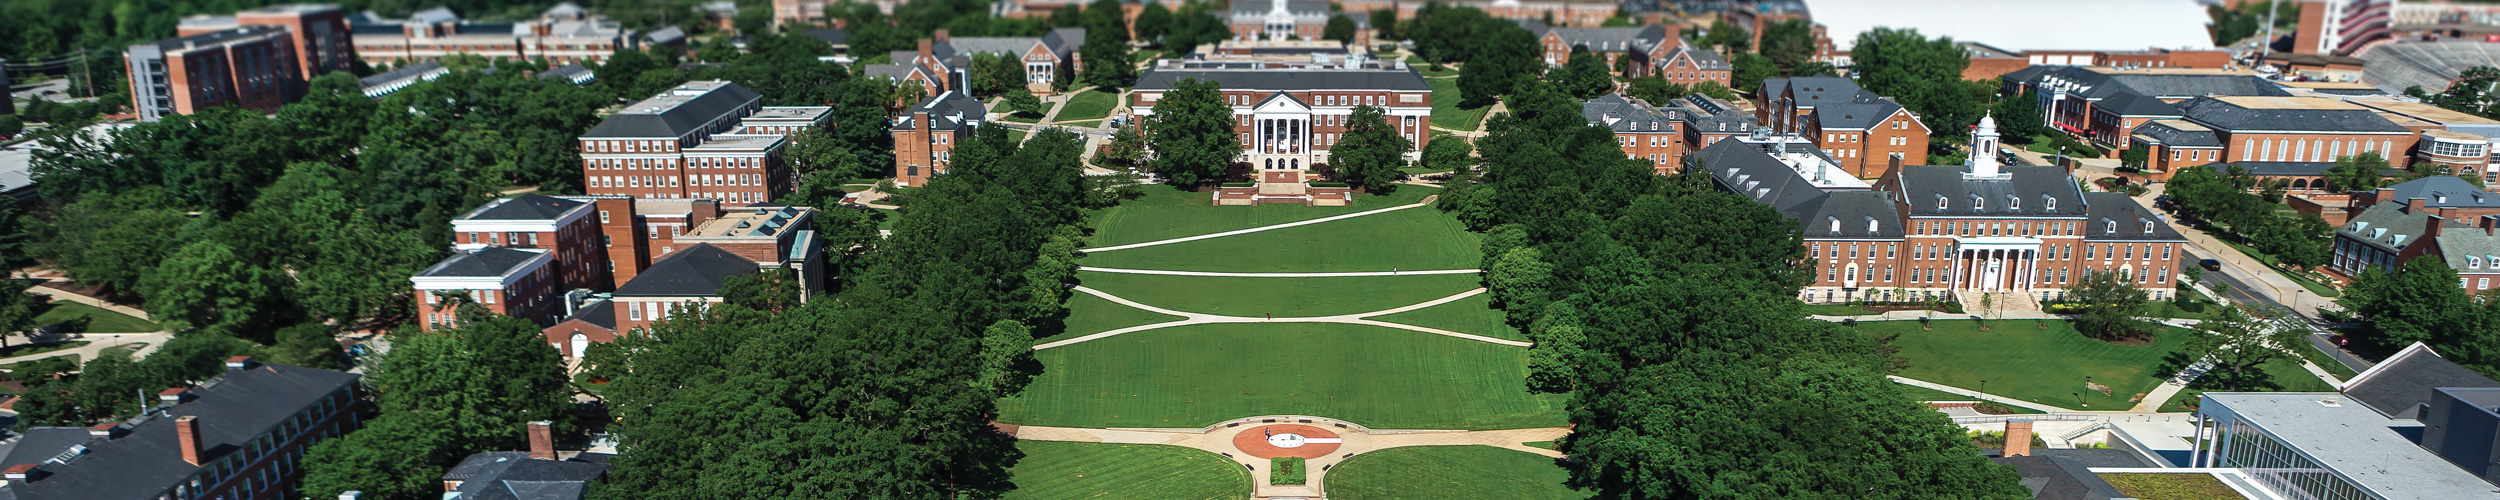 An aerial view of the UMD campus